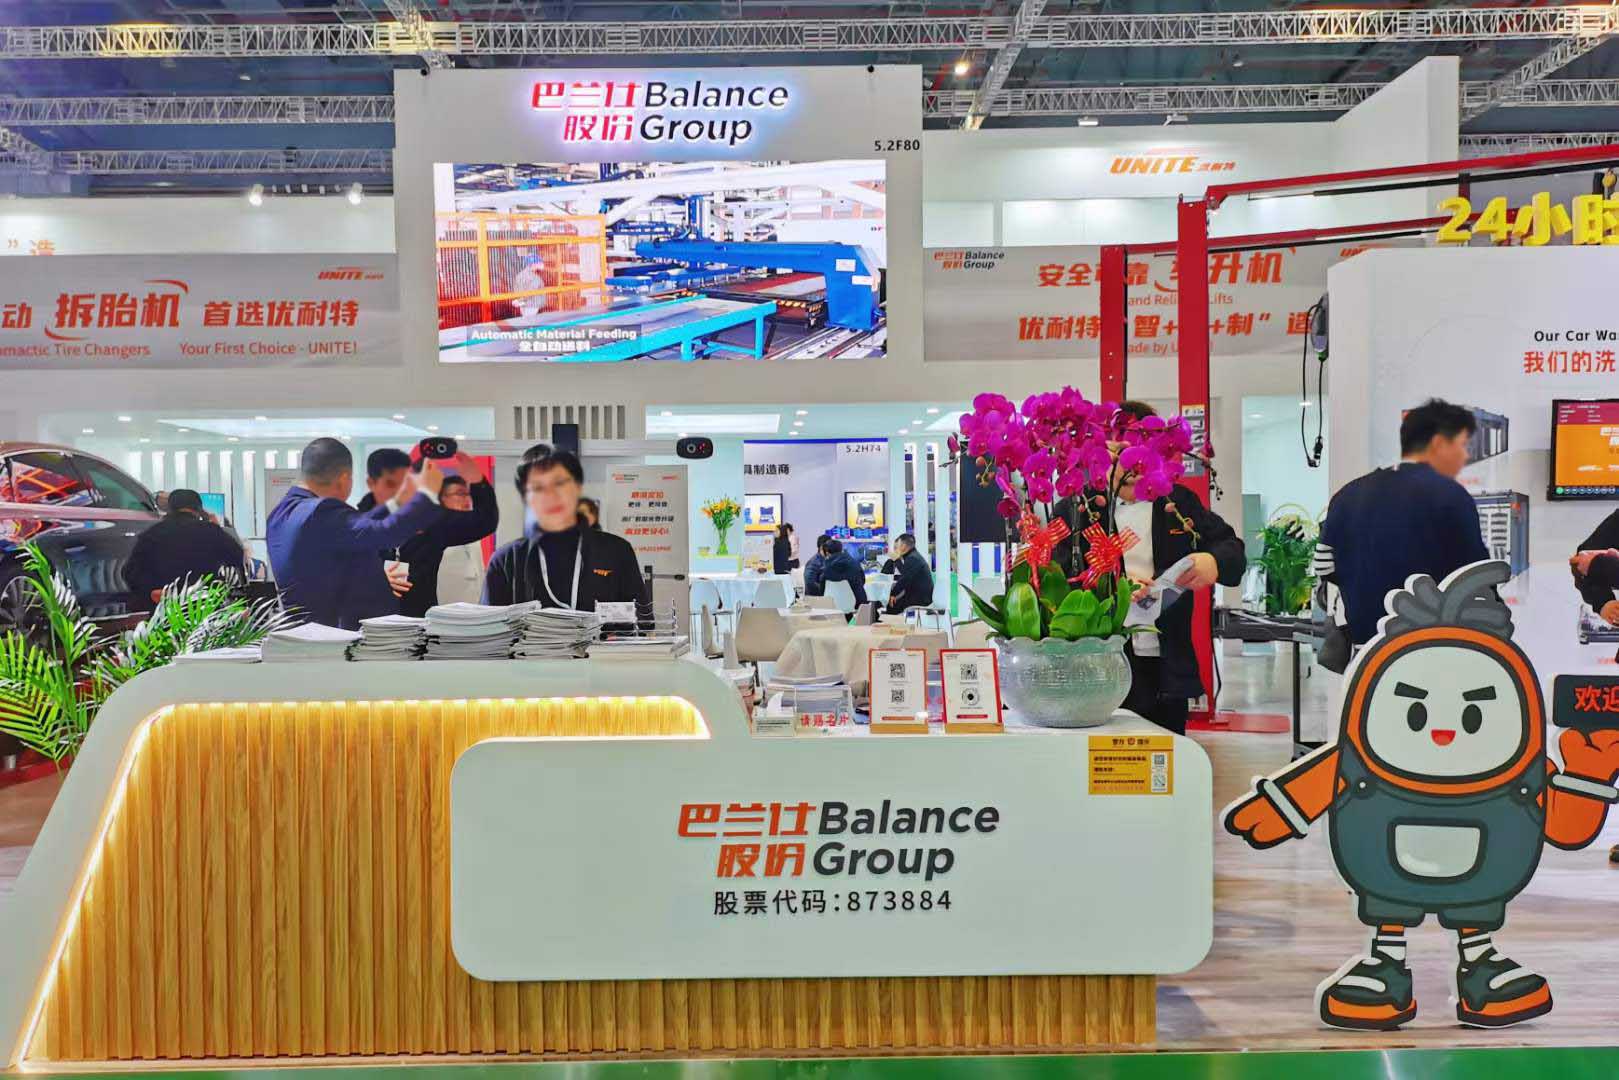 Showtime!🙋 Welcome to join Balance group at Automechanika Shanghai 5.2F80🍻 👋